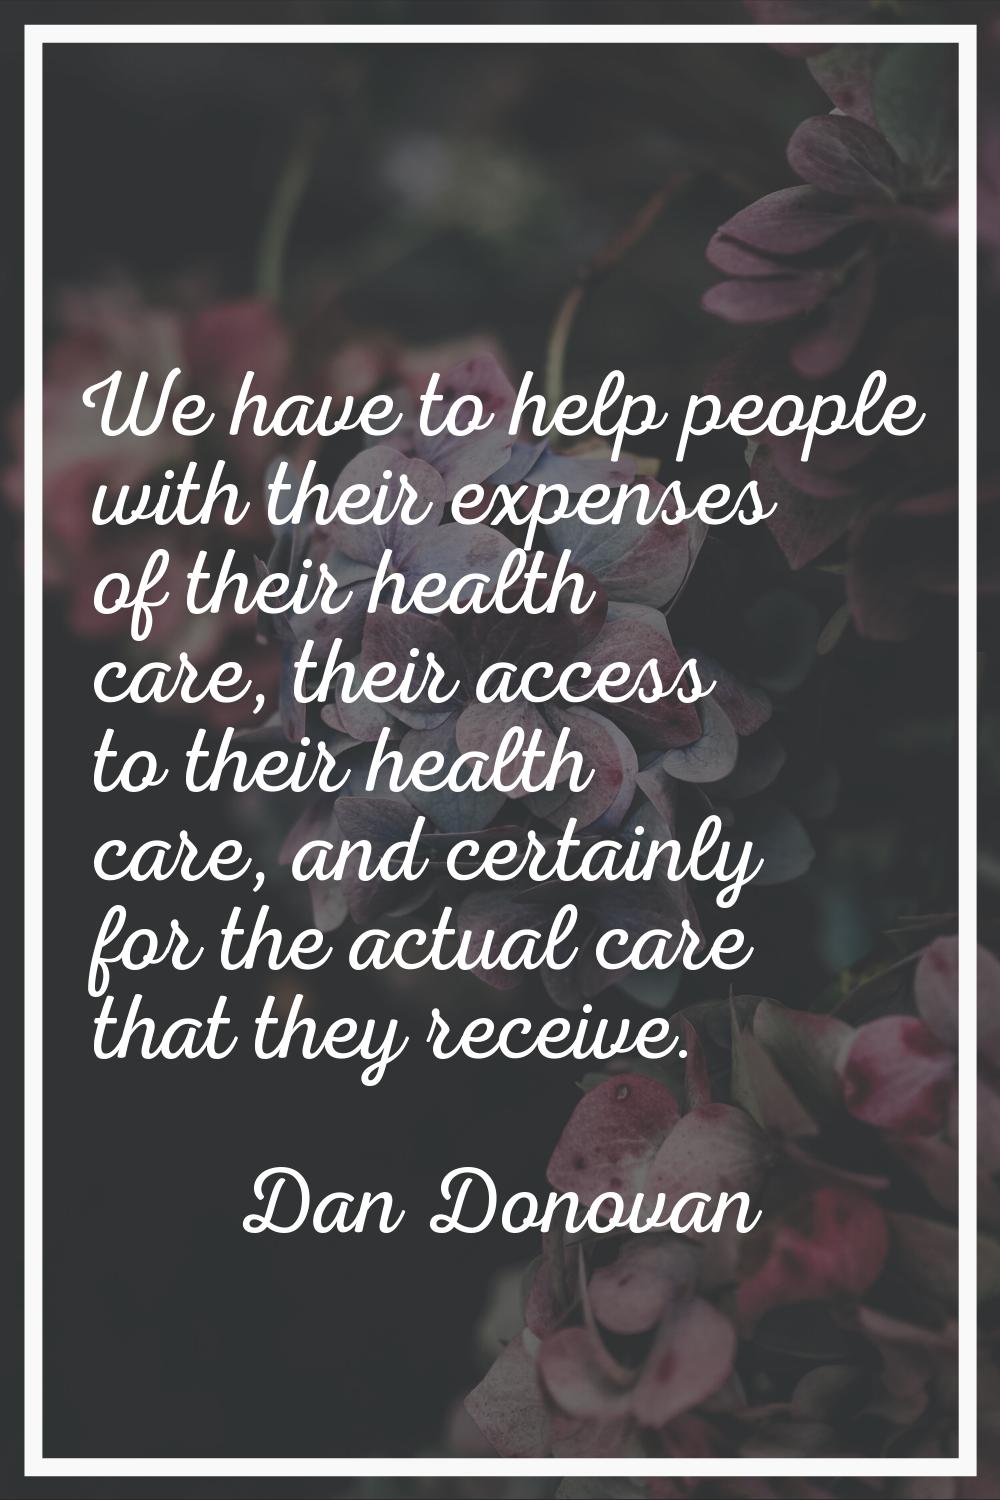 We have to help people with their expenses of their health care, their access to their health care,